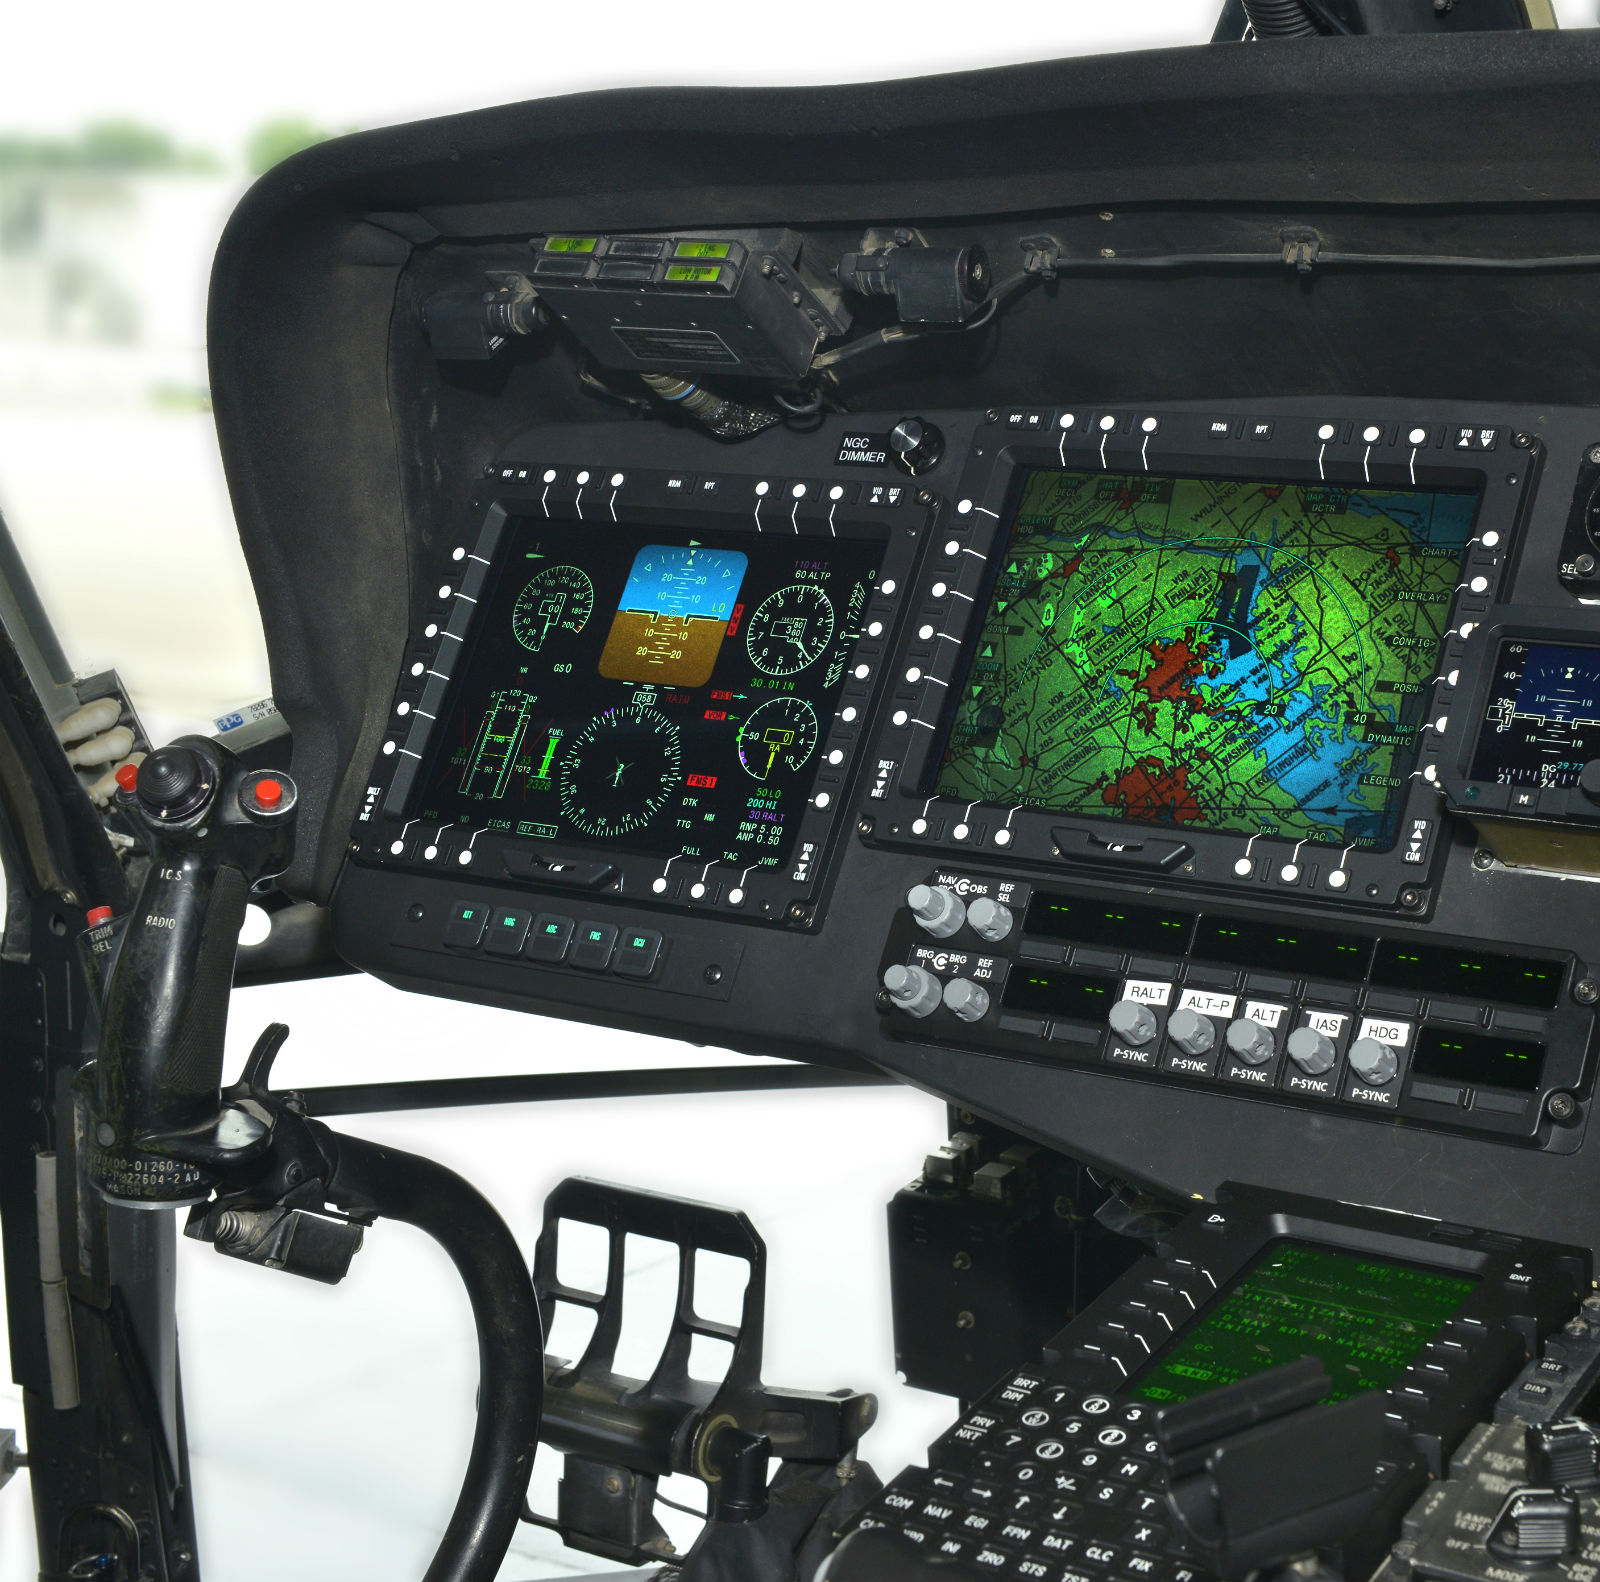 Monster Machines: Black Hawk Choppers Are Finally Getting The Digital Cockpits They Need